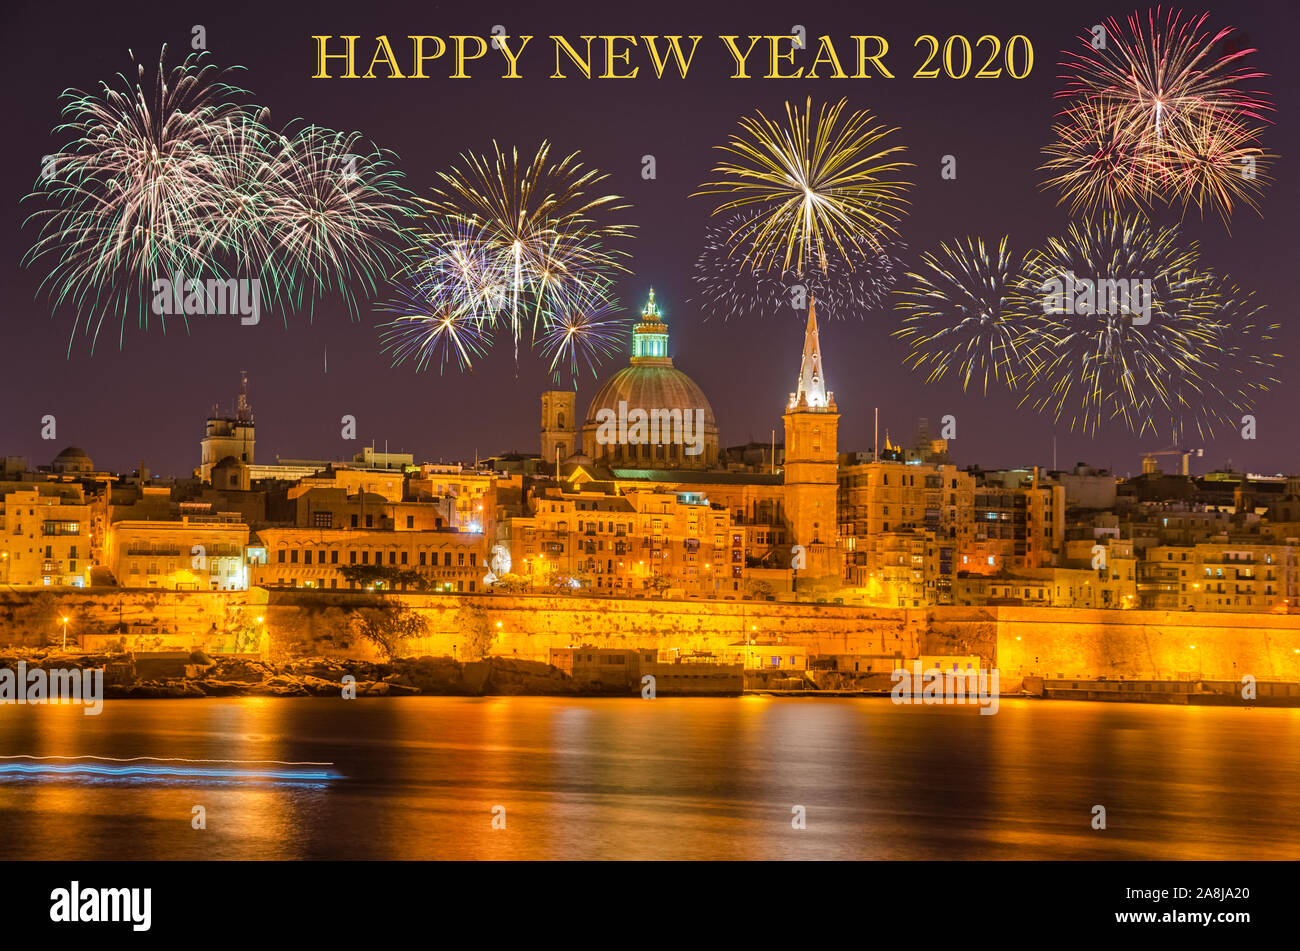 New year's eve and fireworks over Valletta, Malta Stock Photo